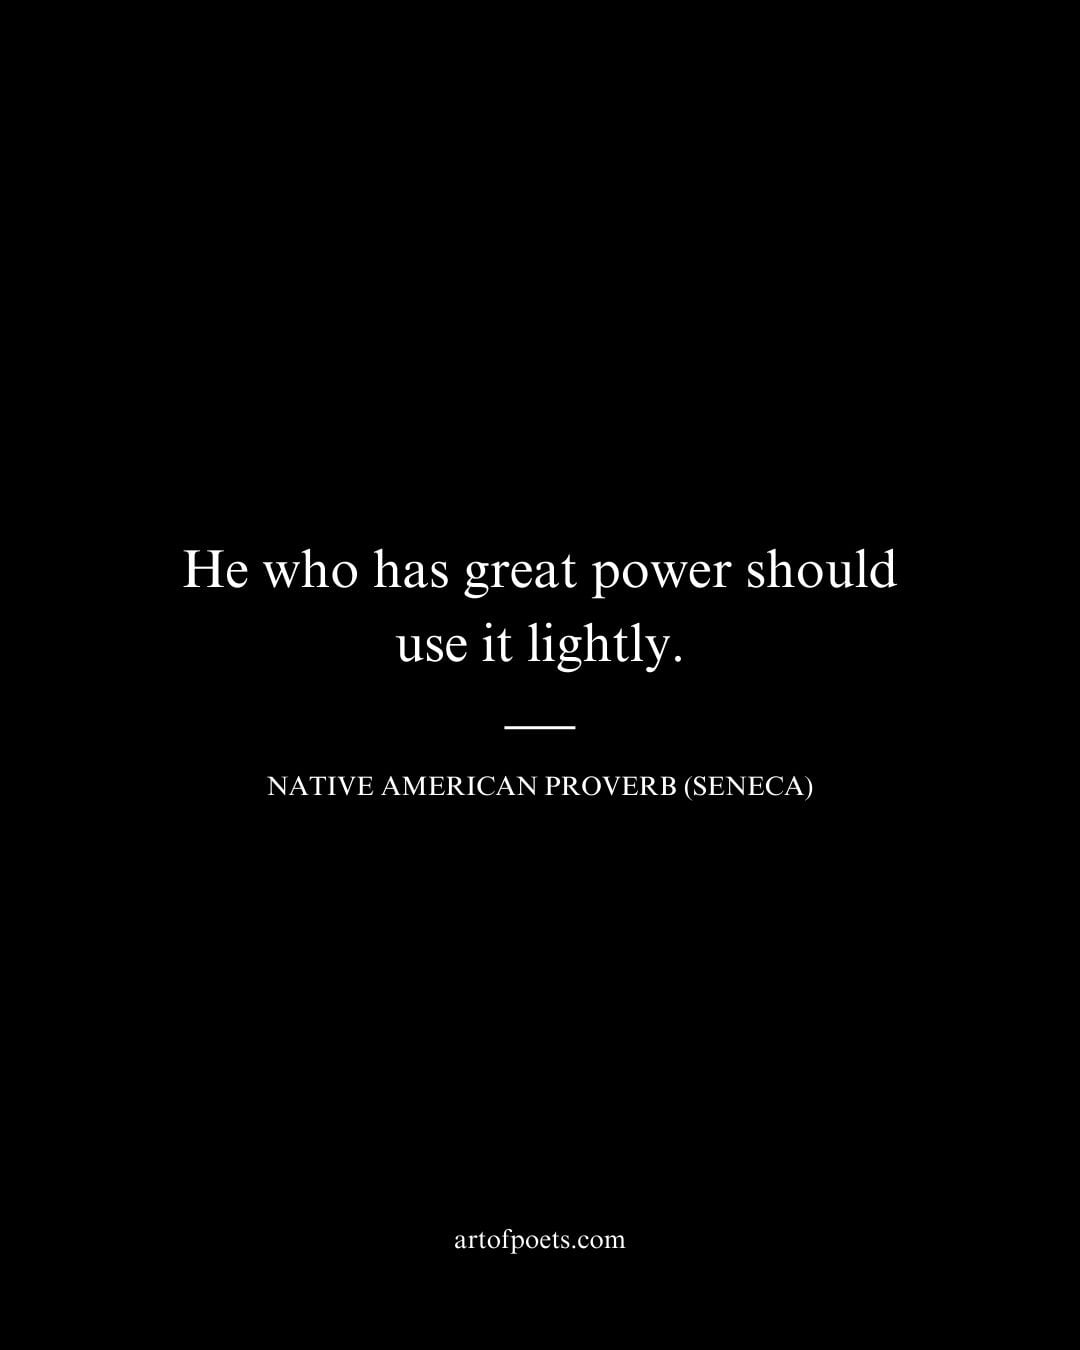 He who has great power should use it lightly